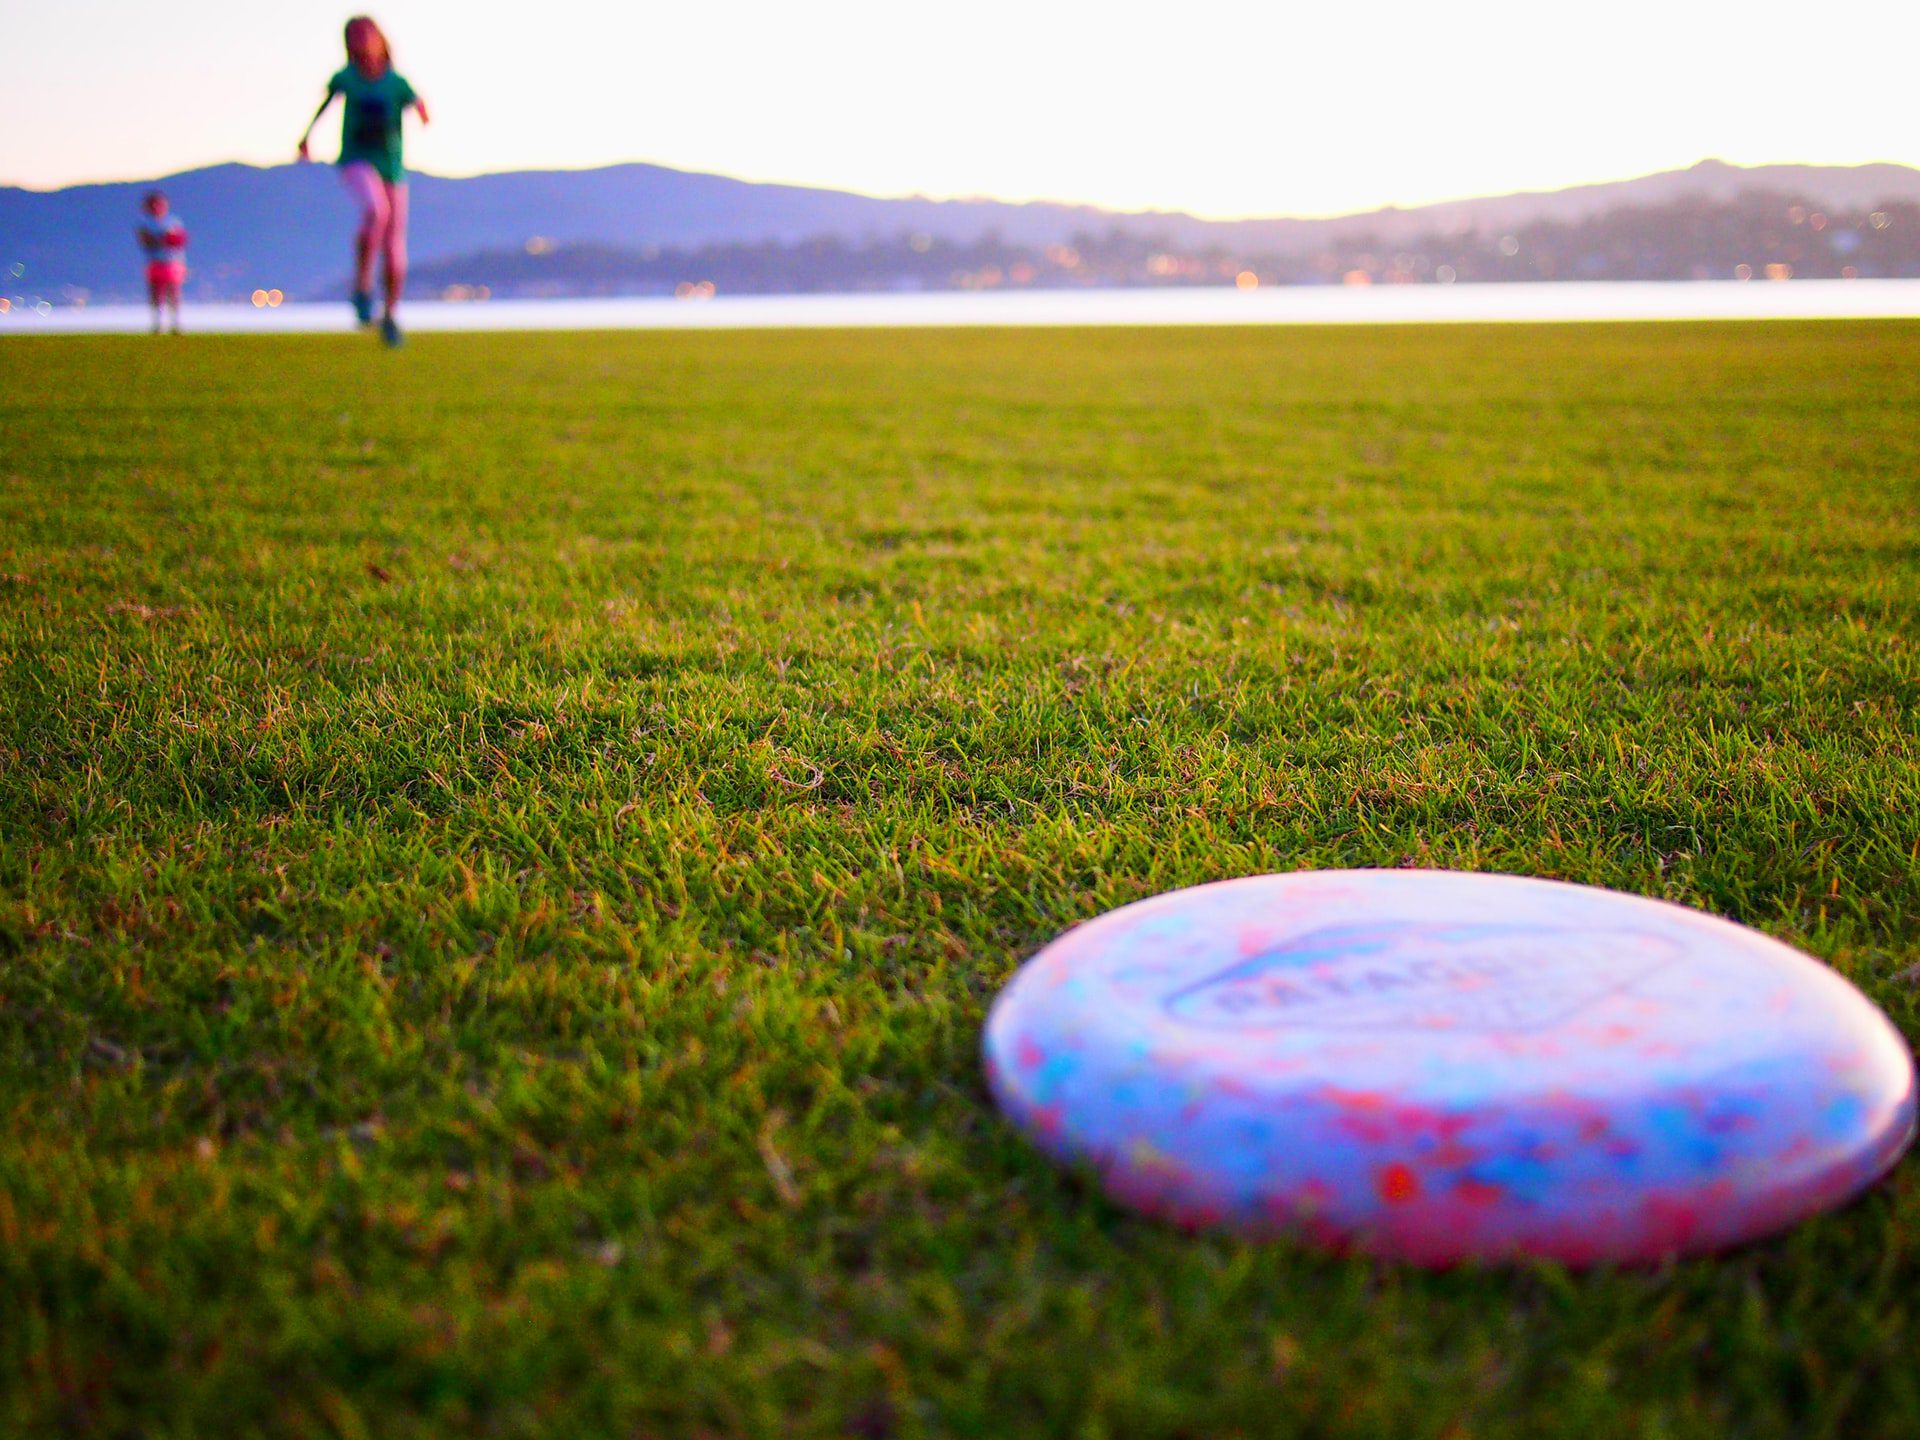 A closeup of a frisbee lying on the grass at dusk with two kids running towards it at a Kelowna park